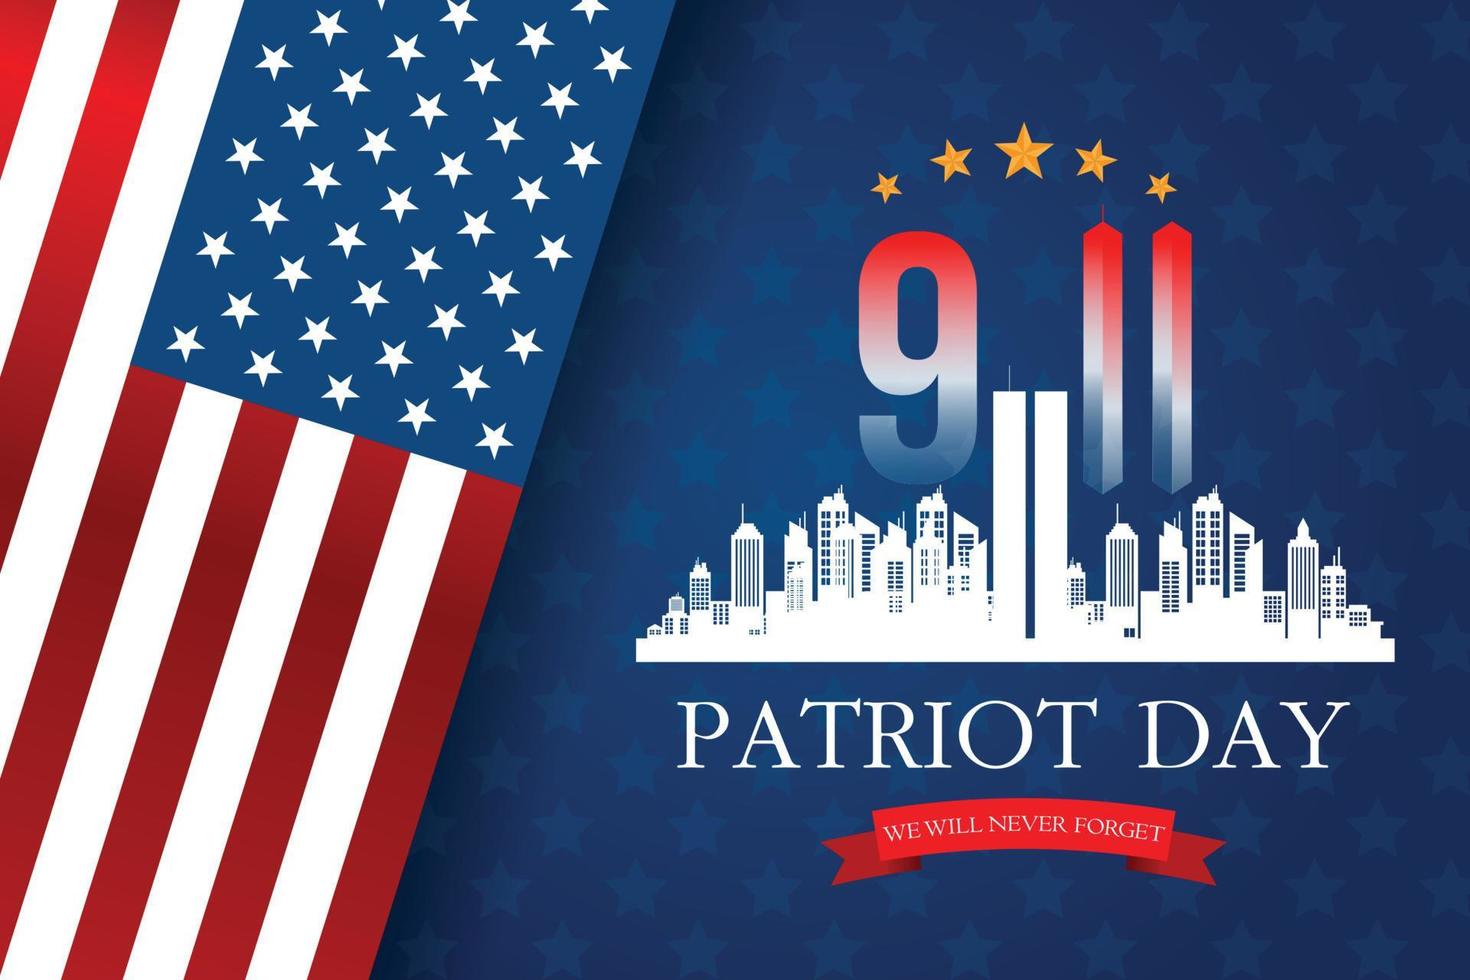 Vector banner design template with american flag and text on dark blue background for Patriot Day. vector poster. Patriot Day, September 11, We will never forget